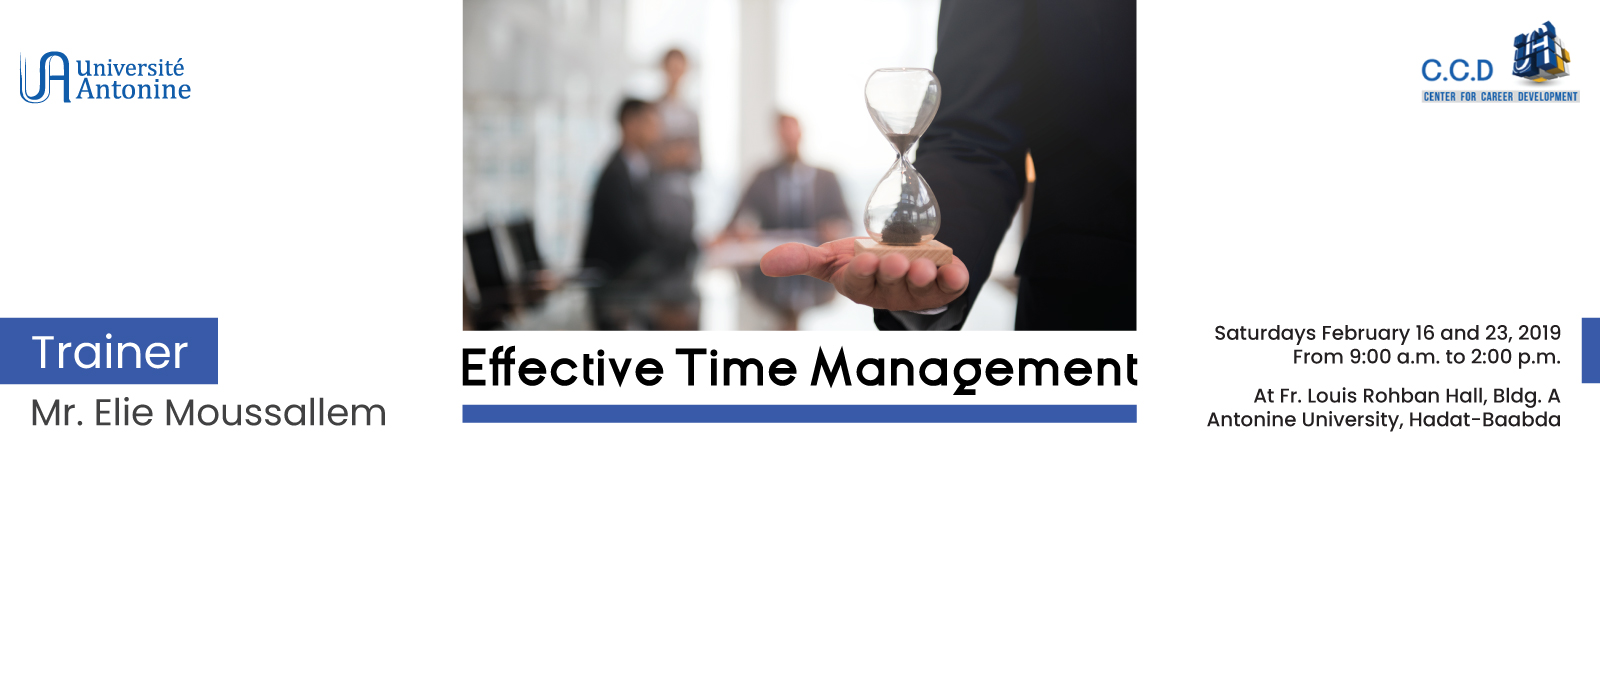 Training session entitled “Effective Time Management“ organized by the C.C.D